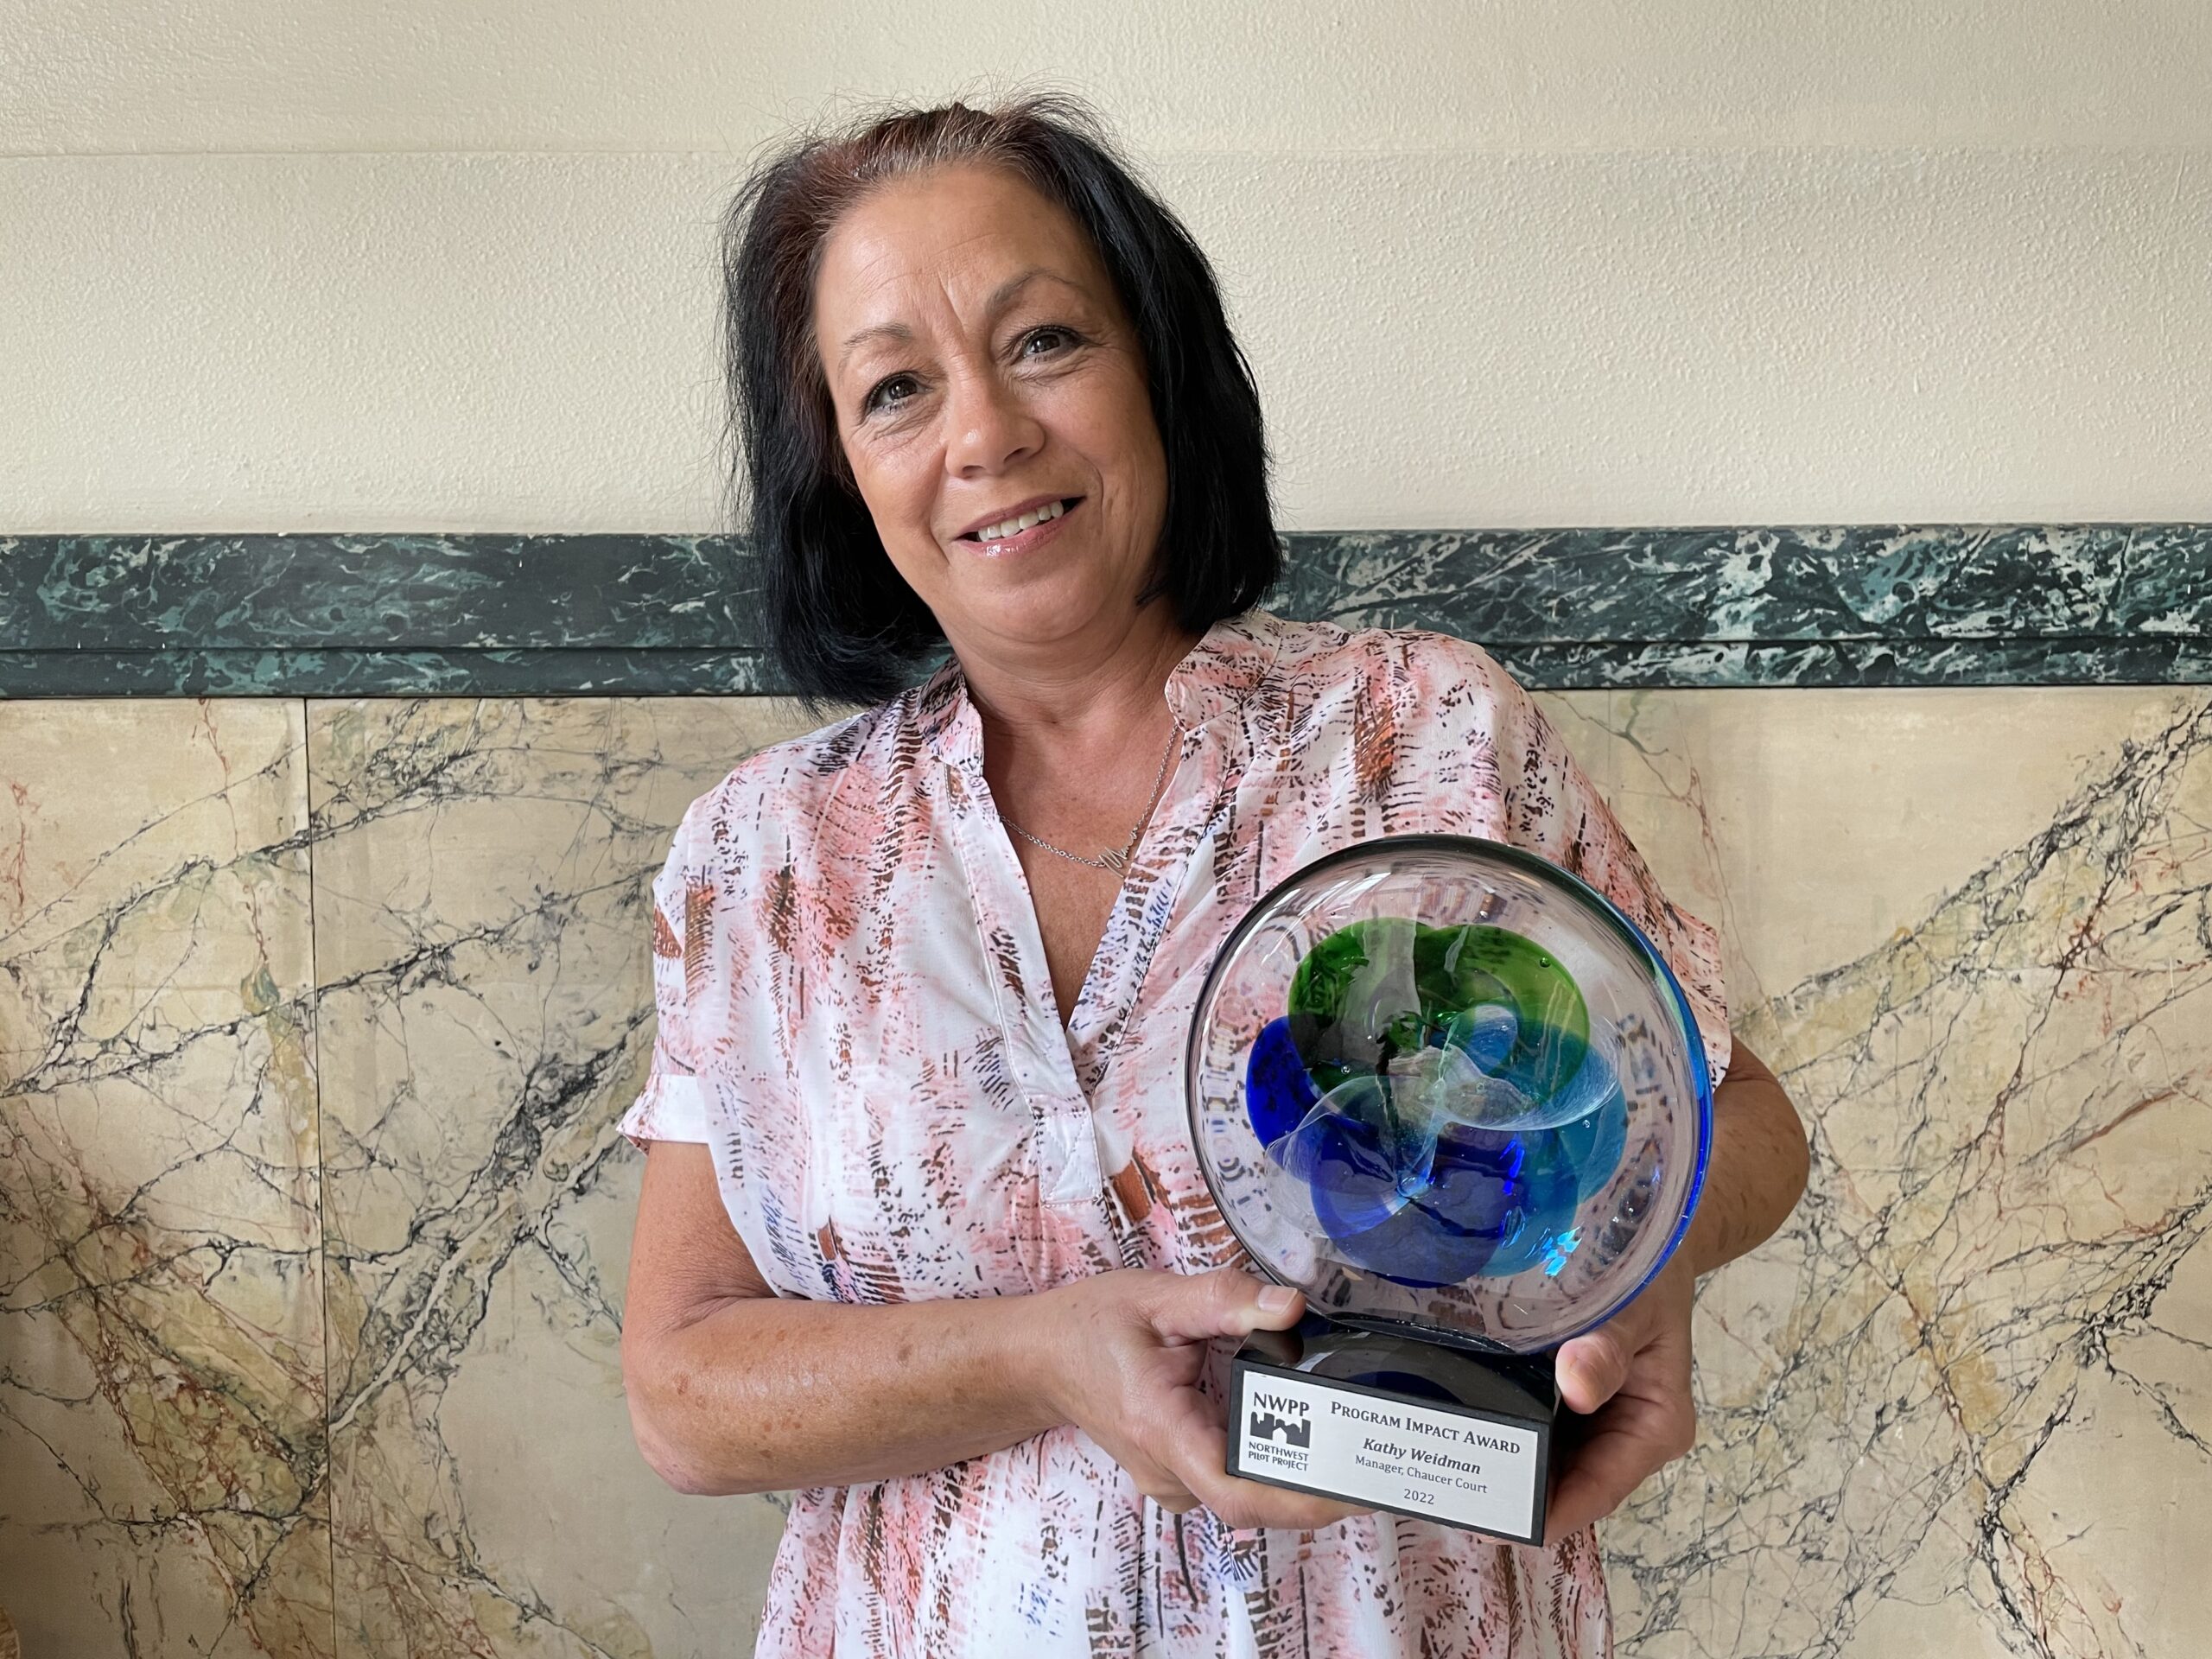 Kathy Weidman holds her award, a colored glass disc on a base with a plaque. She stands in front of a marbled stone wall in the main Chaucer Court stairway